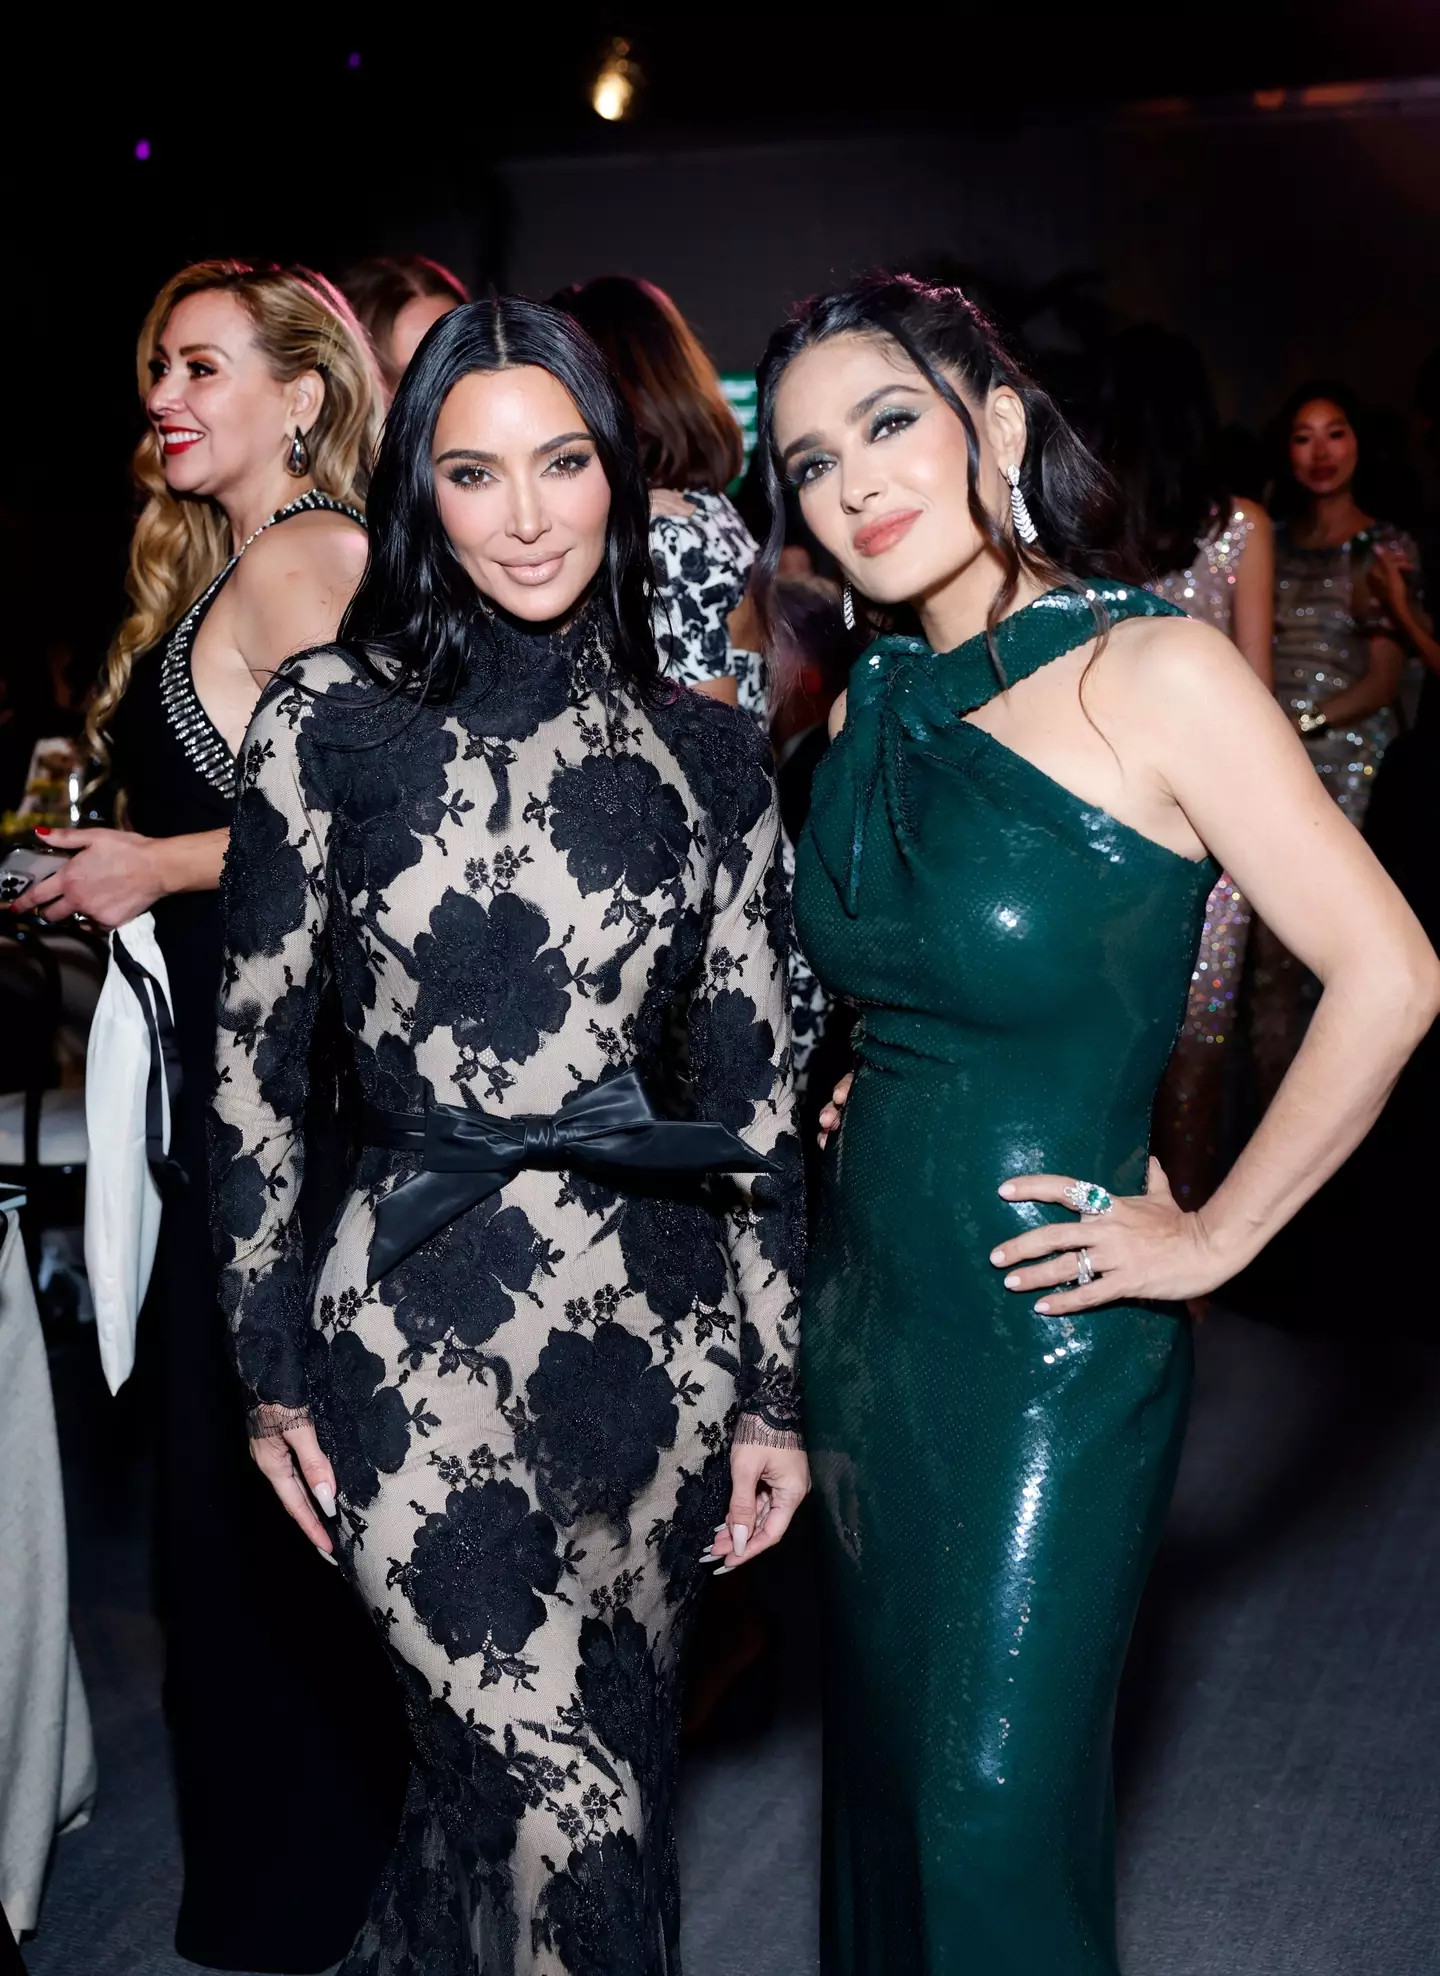 Kim approached Salma Hayek for advice on the acting role.